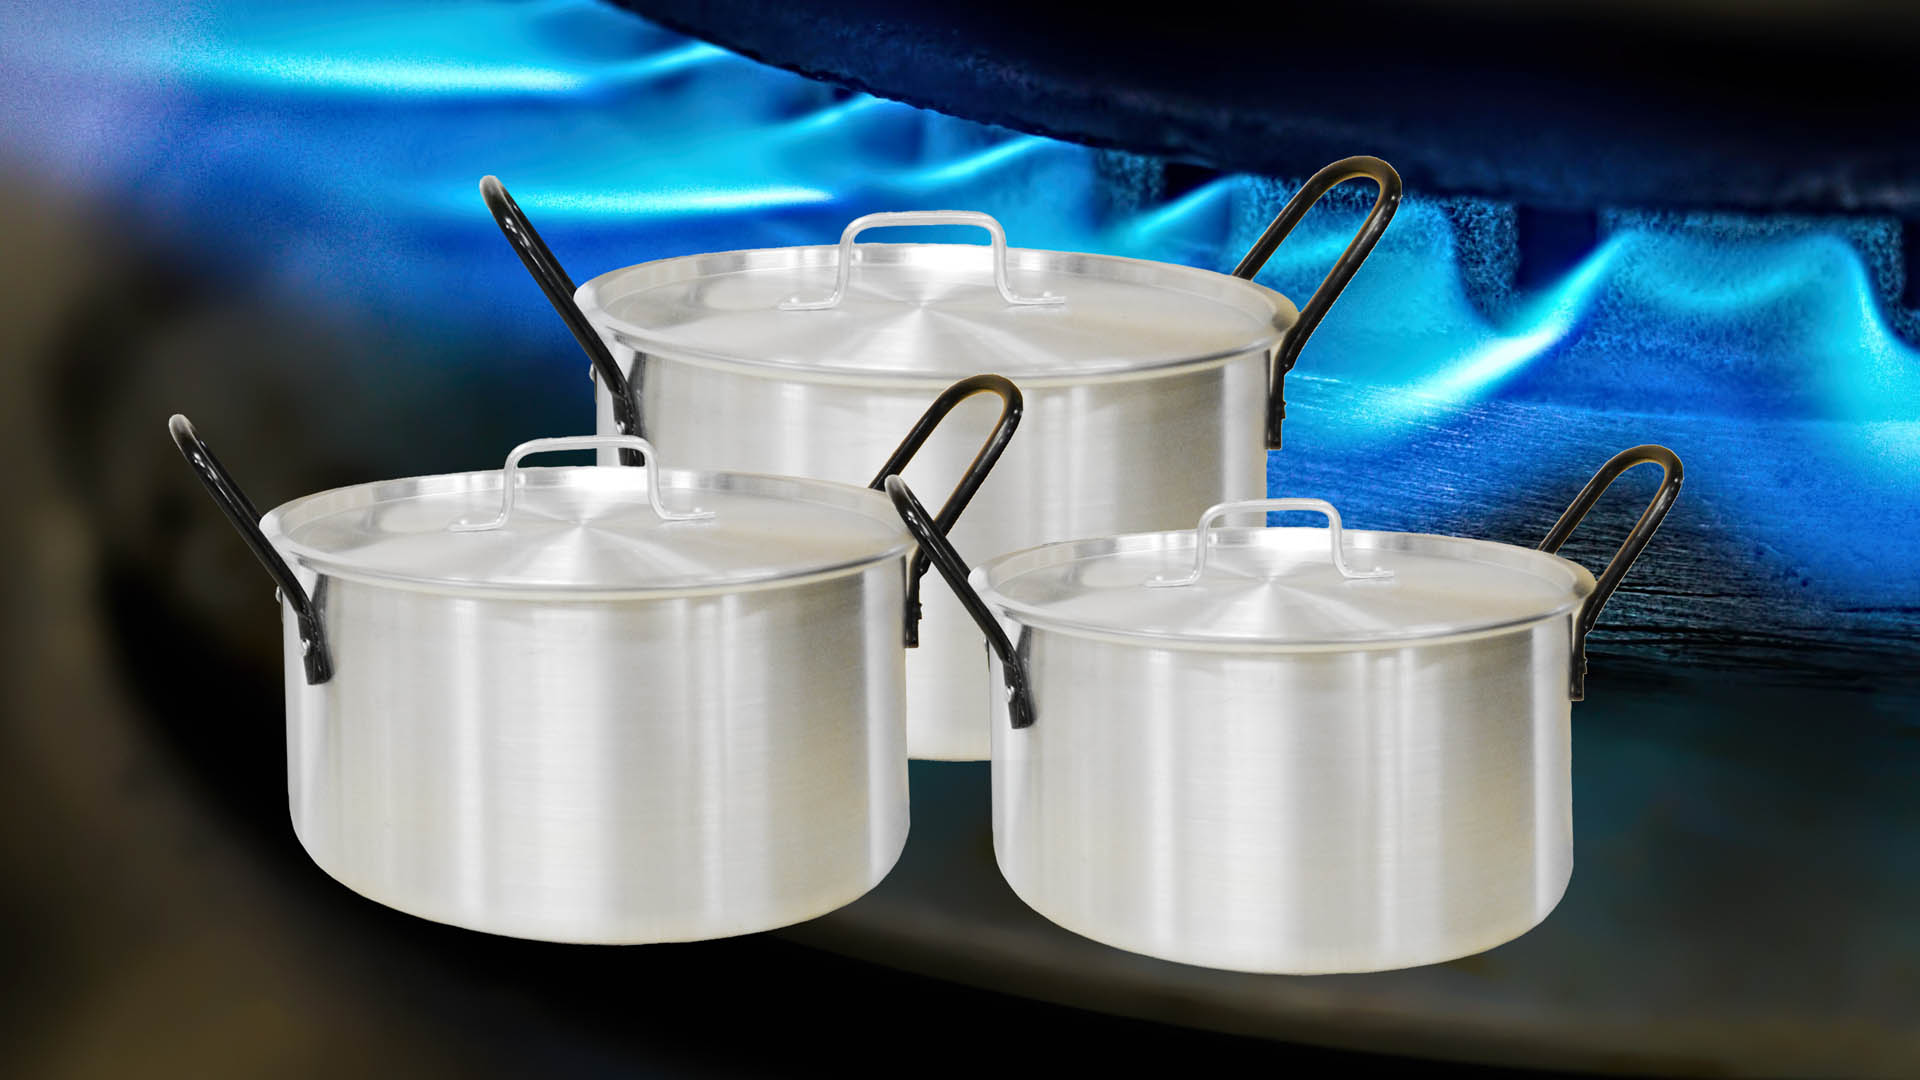 We stock a wide variety of Aluminium and Cast Iron pots and pans